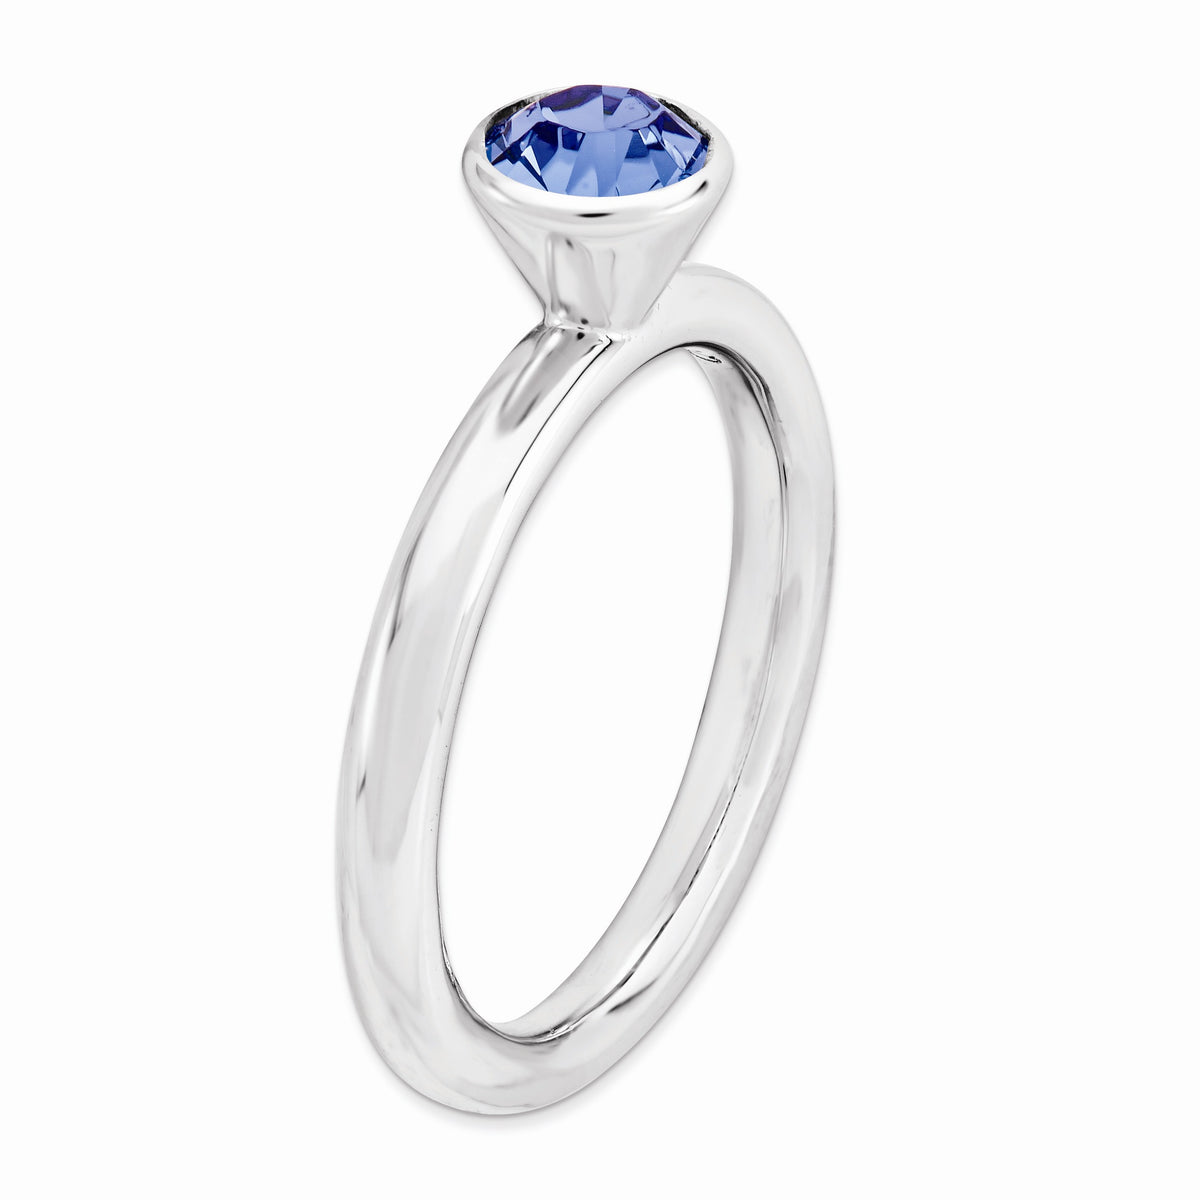 Alternate view of the 5mm High Profile Sterling Silver w/ Blue Crystals Stack Ring by The Black Bow Jewelry Co.